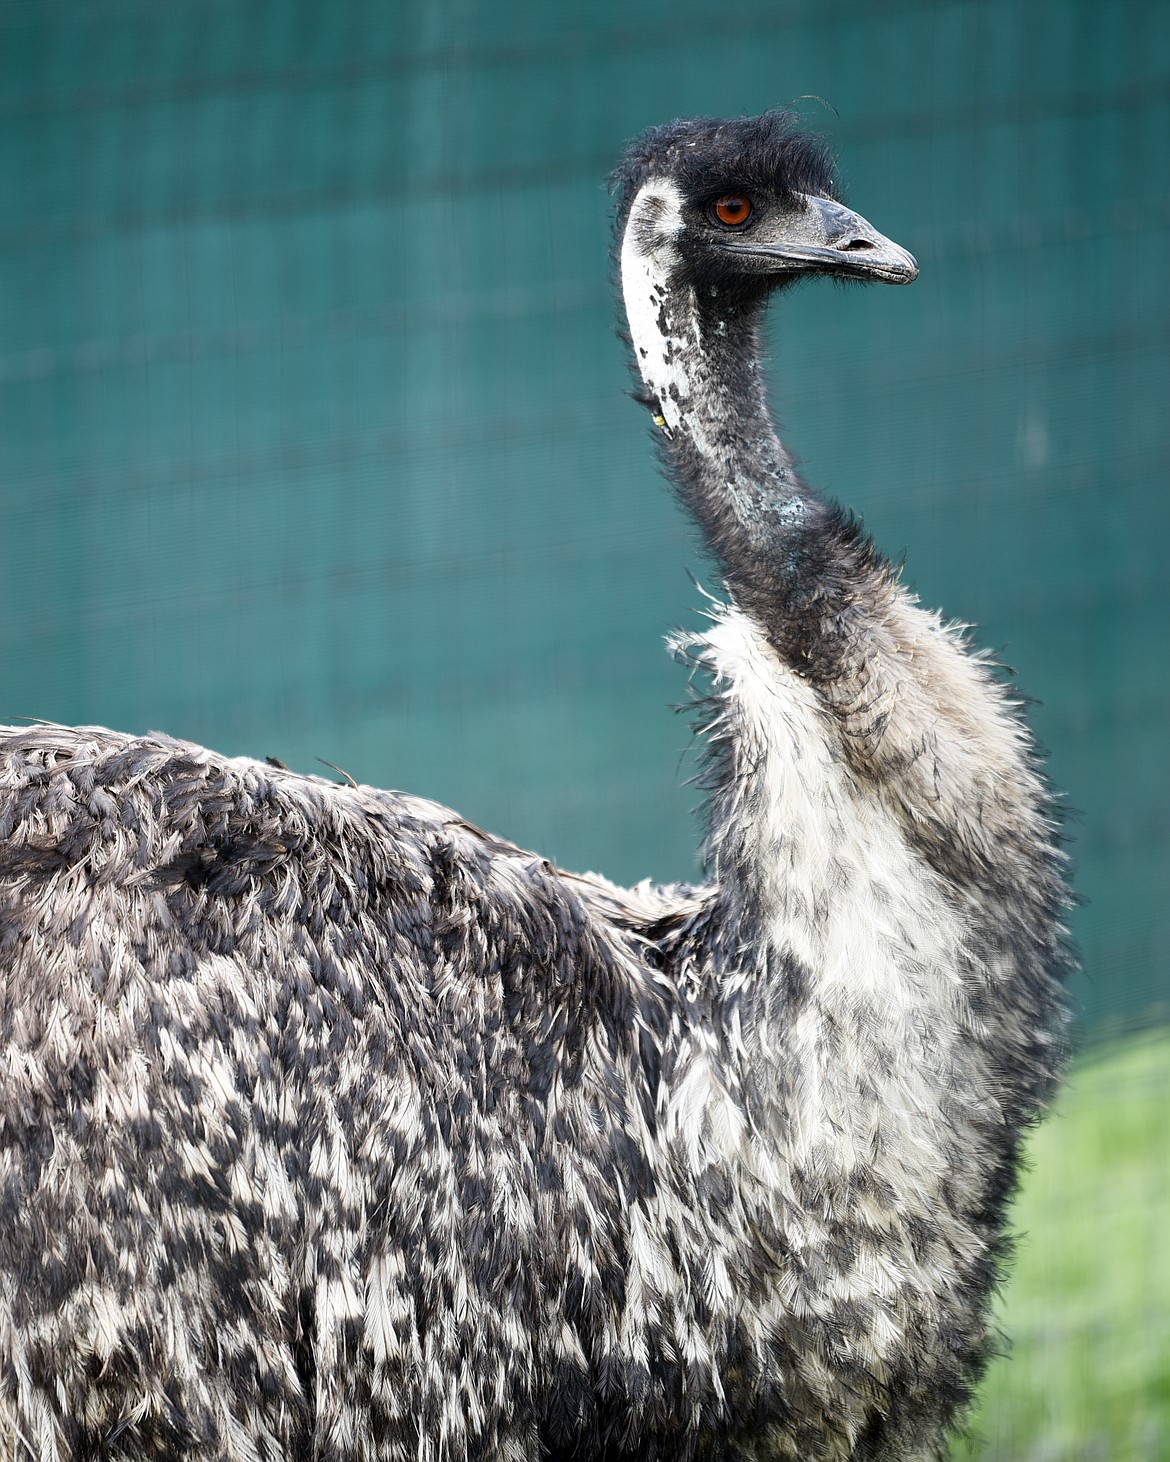 A full grown emu at the Montana Emu Ranch west of Kalispell, on Wednesday, May 1.(Brenda Ahearn/Daily Inter Lake)